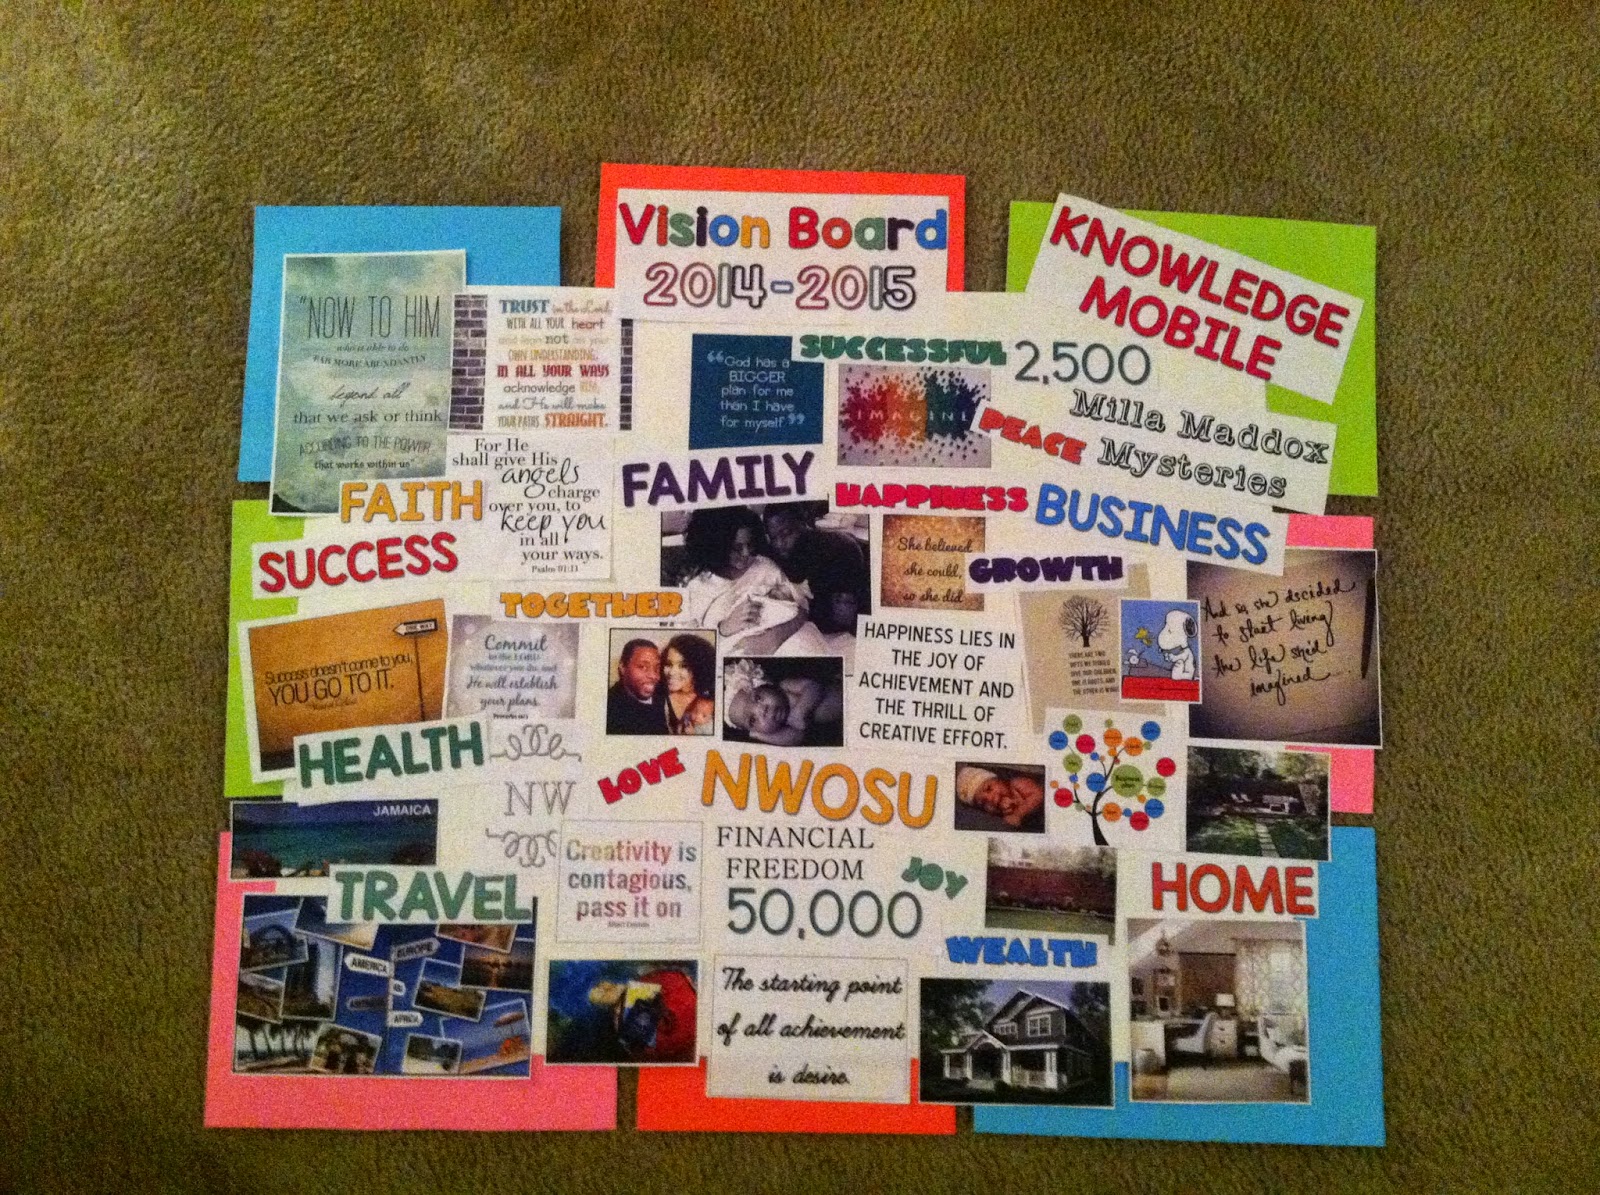 My 2014-2015 Vision Board - Knowledge Mobile